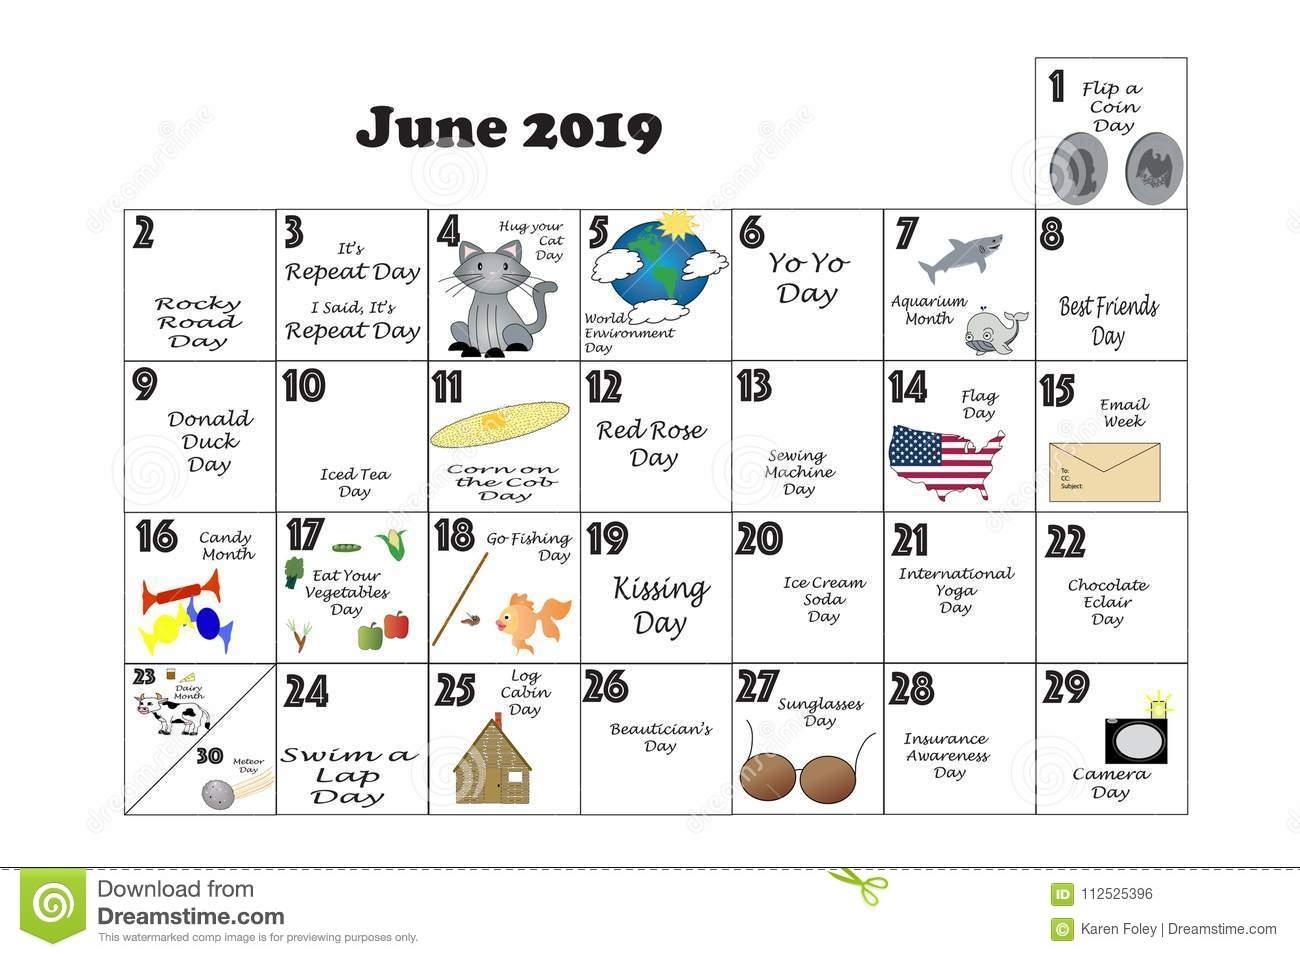 June 2019 Quirky Holidays And Unusual Events Stock Illustration Calendar Of Quirky Holidays